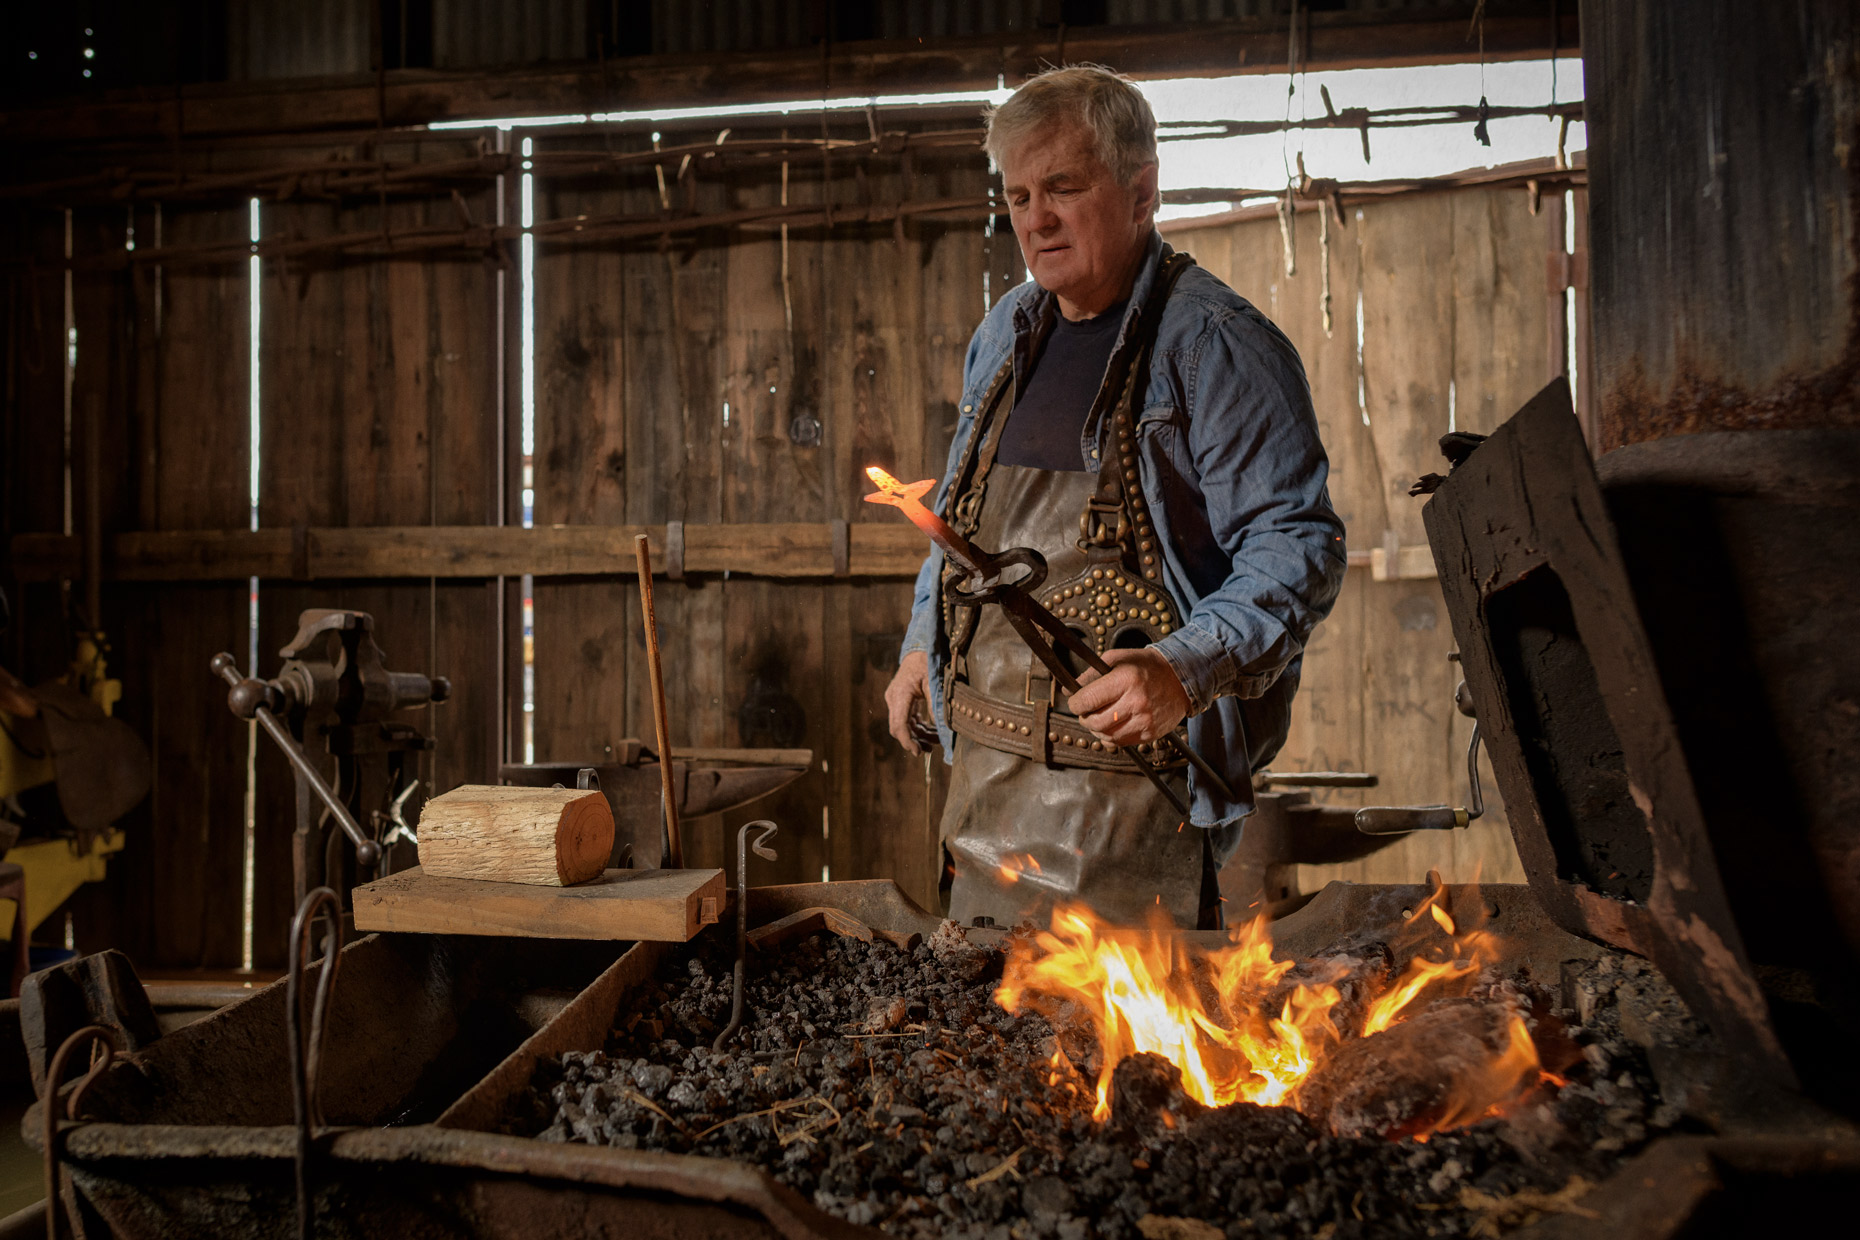 Grapevine, TX blacksmith by Dallas editorial photographer Kevin Brown